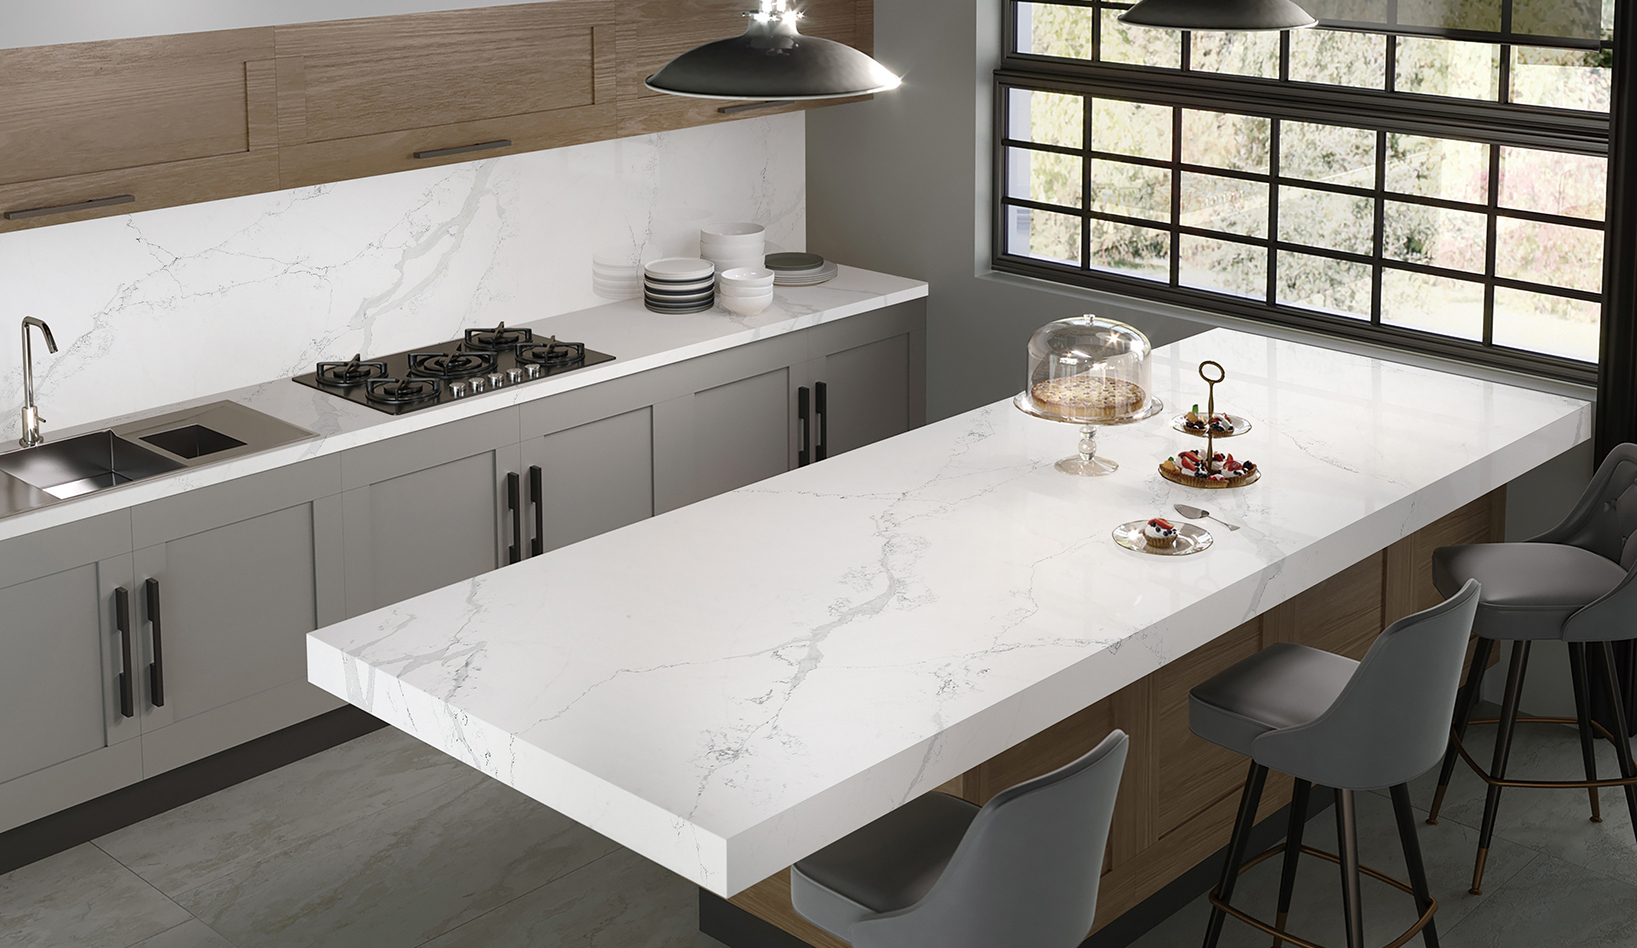 Enhance Your Home's Interior with a Quartz Countertop: Versatility and Customization Options